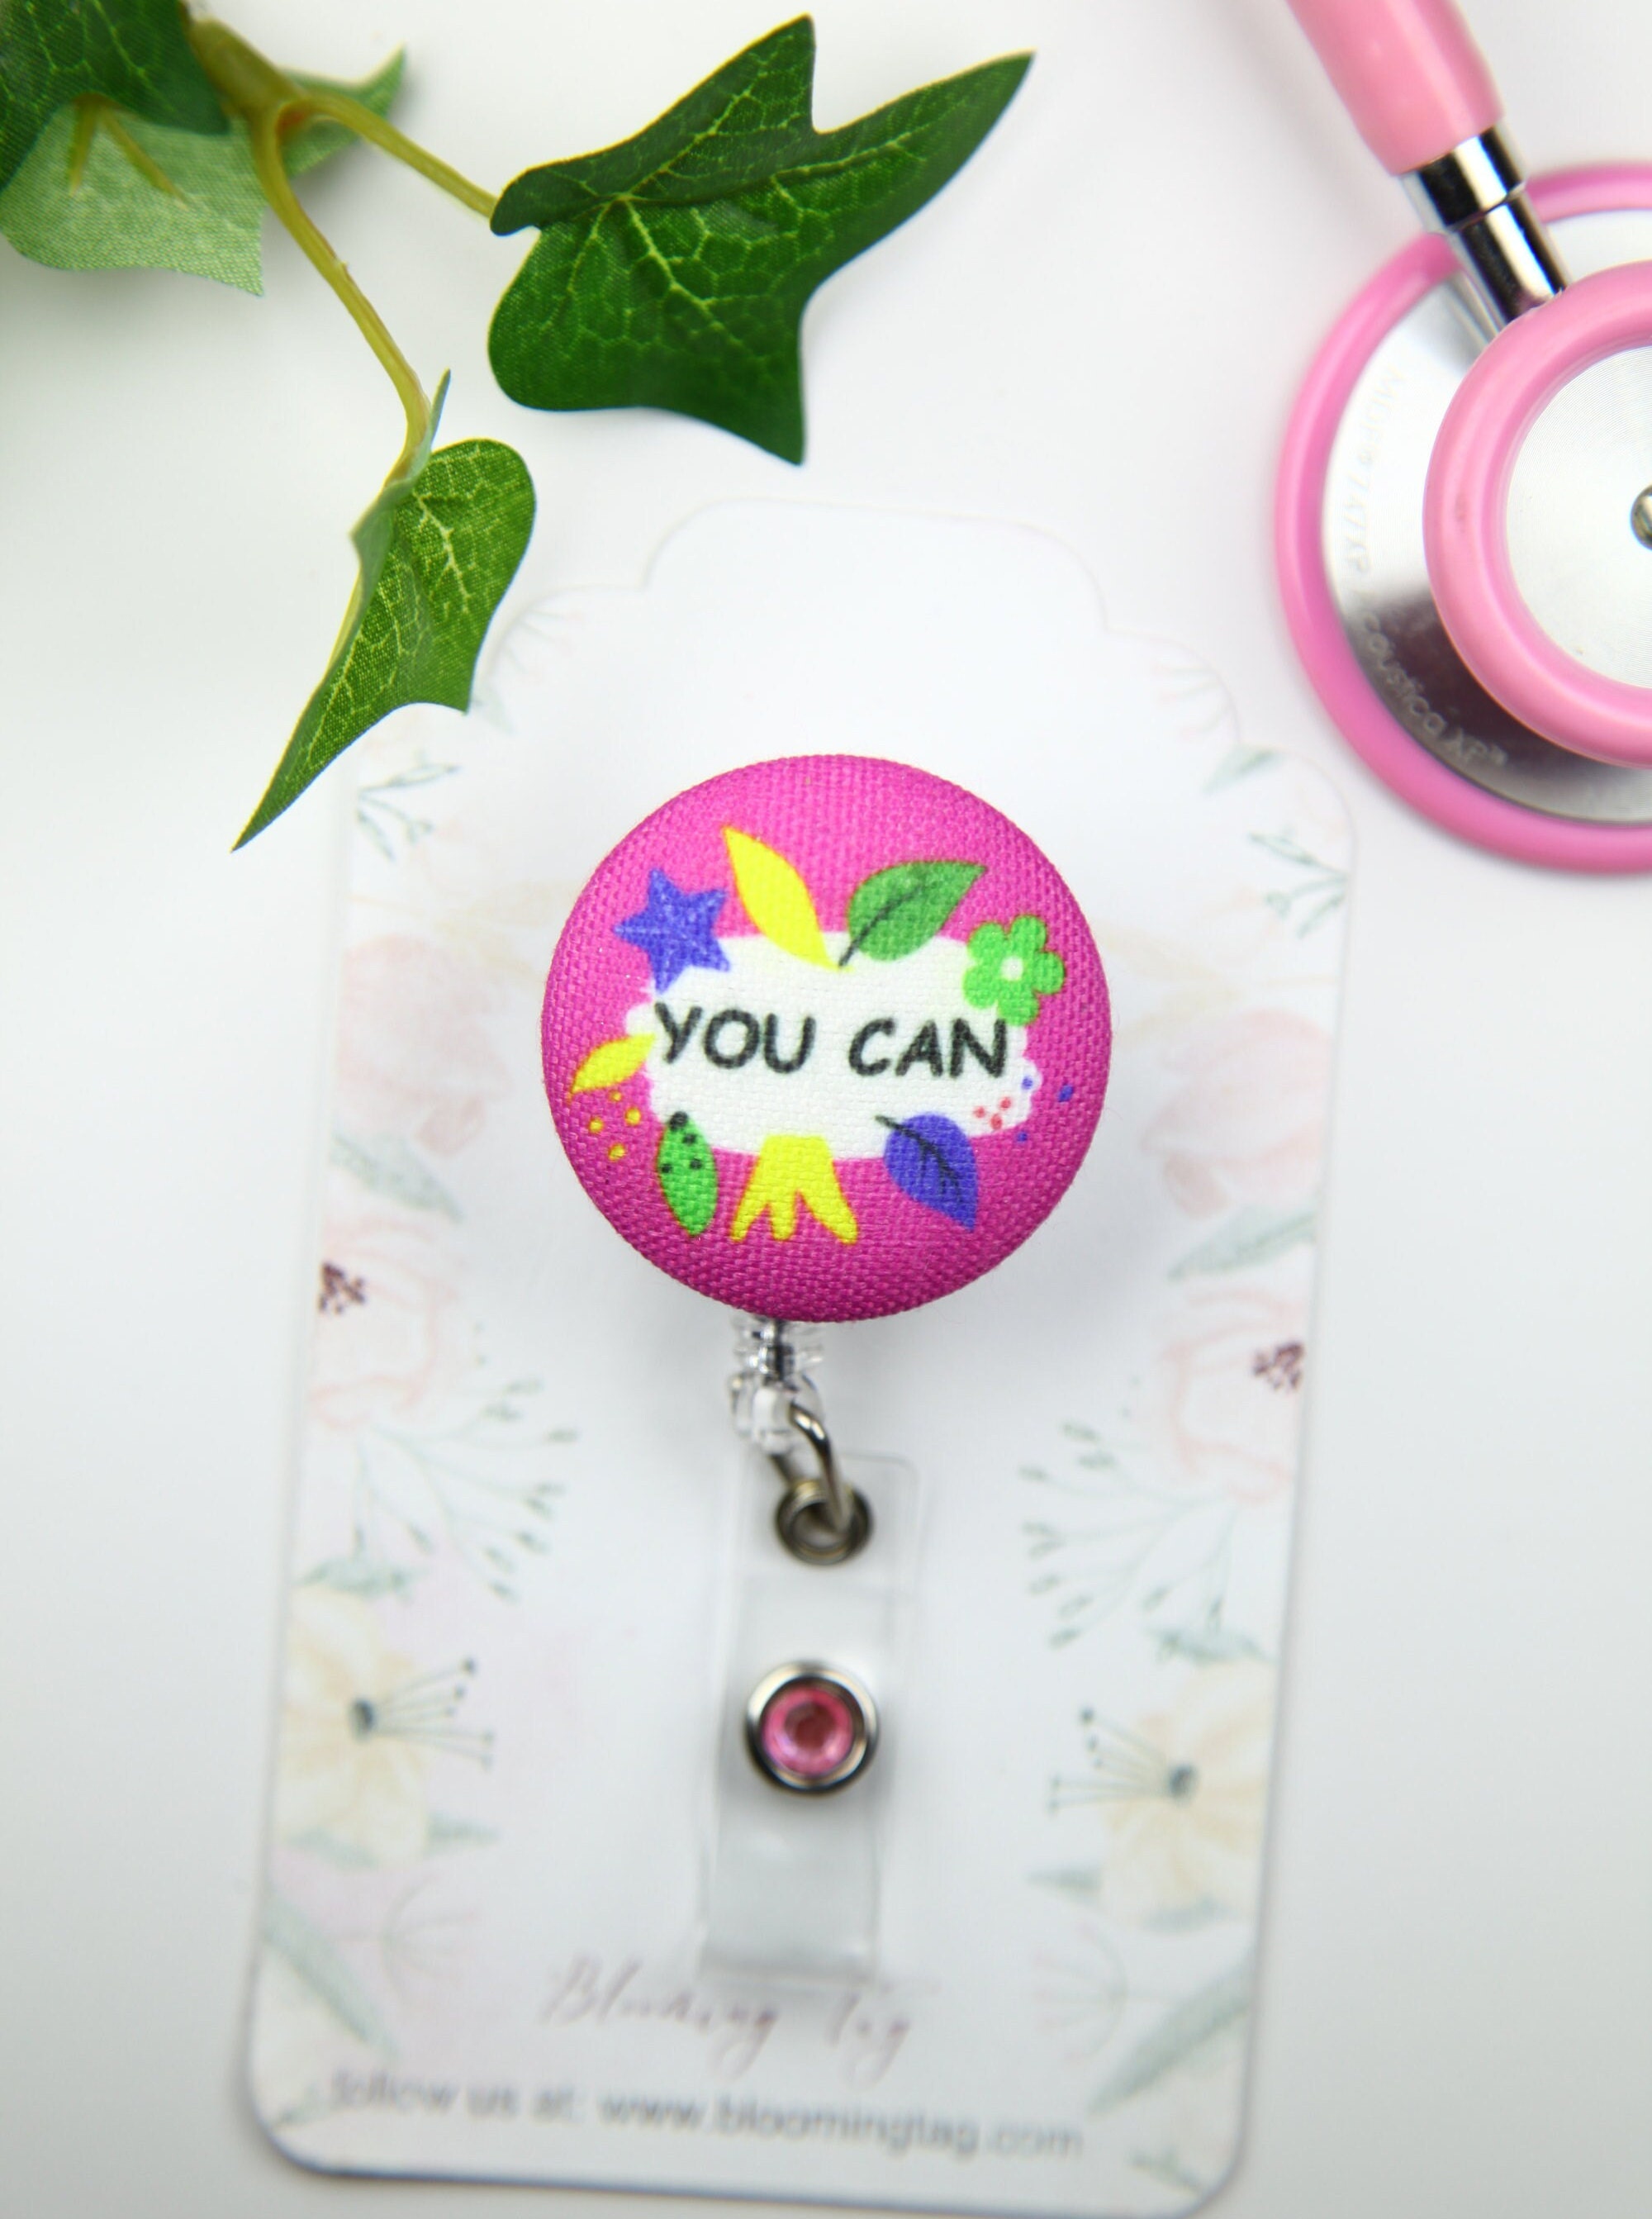 Custom Retractable Badge Holder,Personalized Rn ID,nurse gift,,feminism gifts,motivational Message, Nurse jewelry,stay positive,You Can